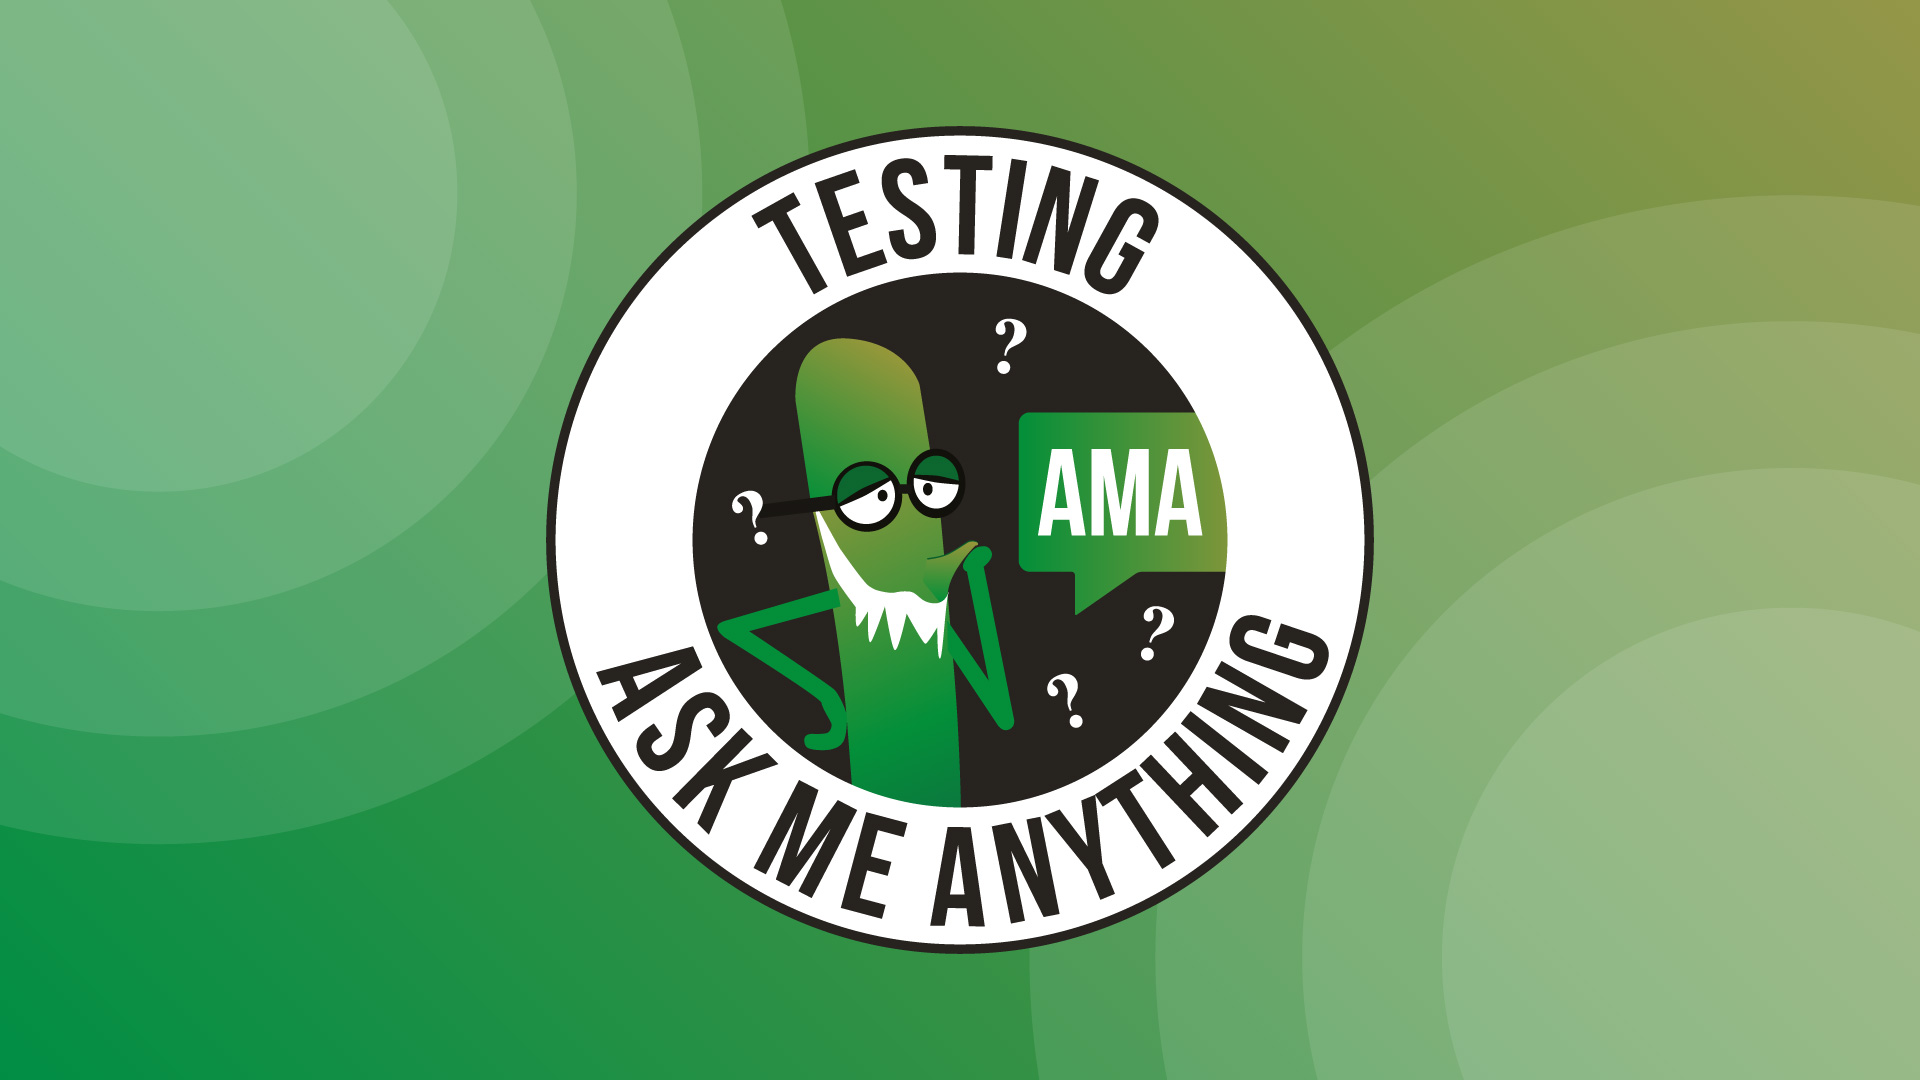 Rediscover Solutions to Your Challenges in the Return of Our ‘Testing, Ask Me Anything’ Webinars